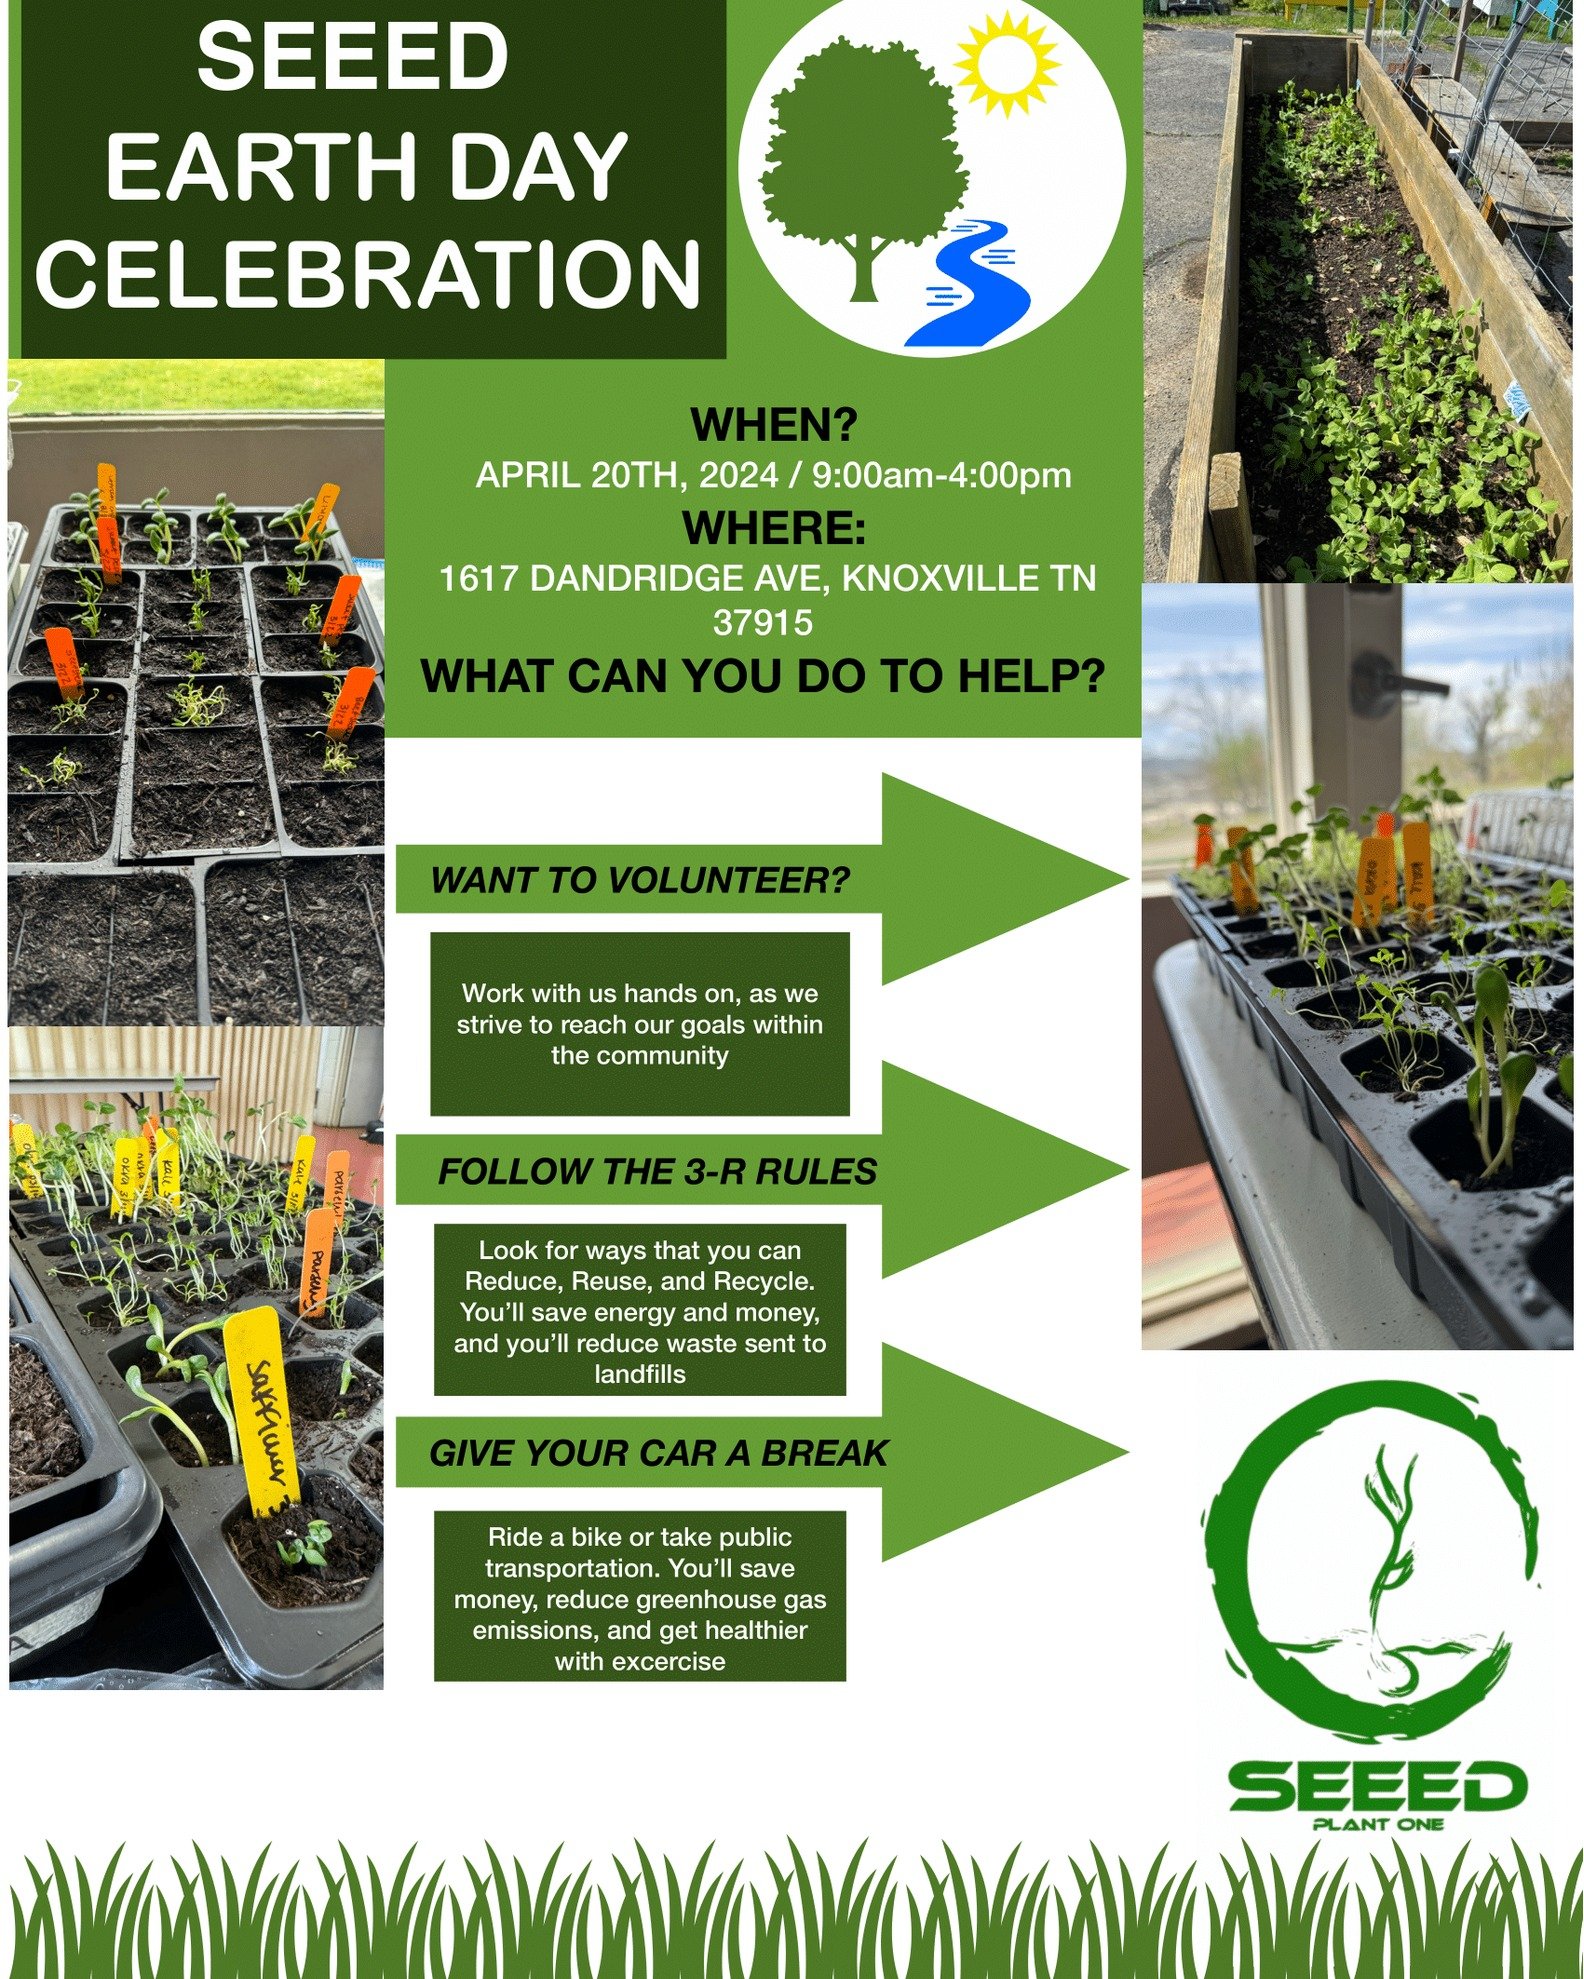 Join us tomorrow, April 20th, for SEEED's Earth Day Celebration. From 9am to 4pm, enjoy entertainment, delicious food, and fun activities as we come together to celebrate our planet! We'll be planting and gardening throughout the day and would love s